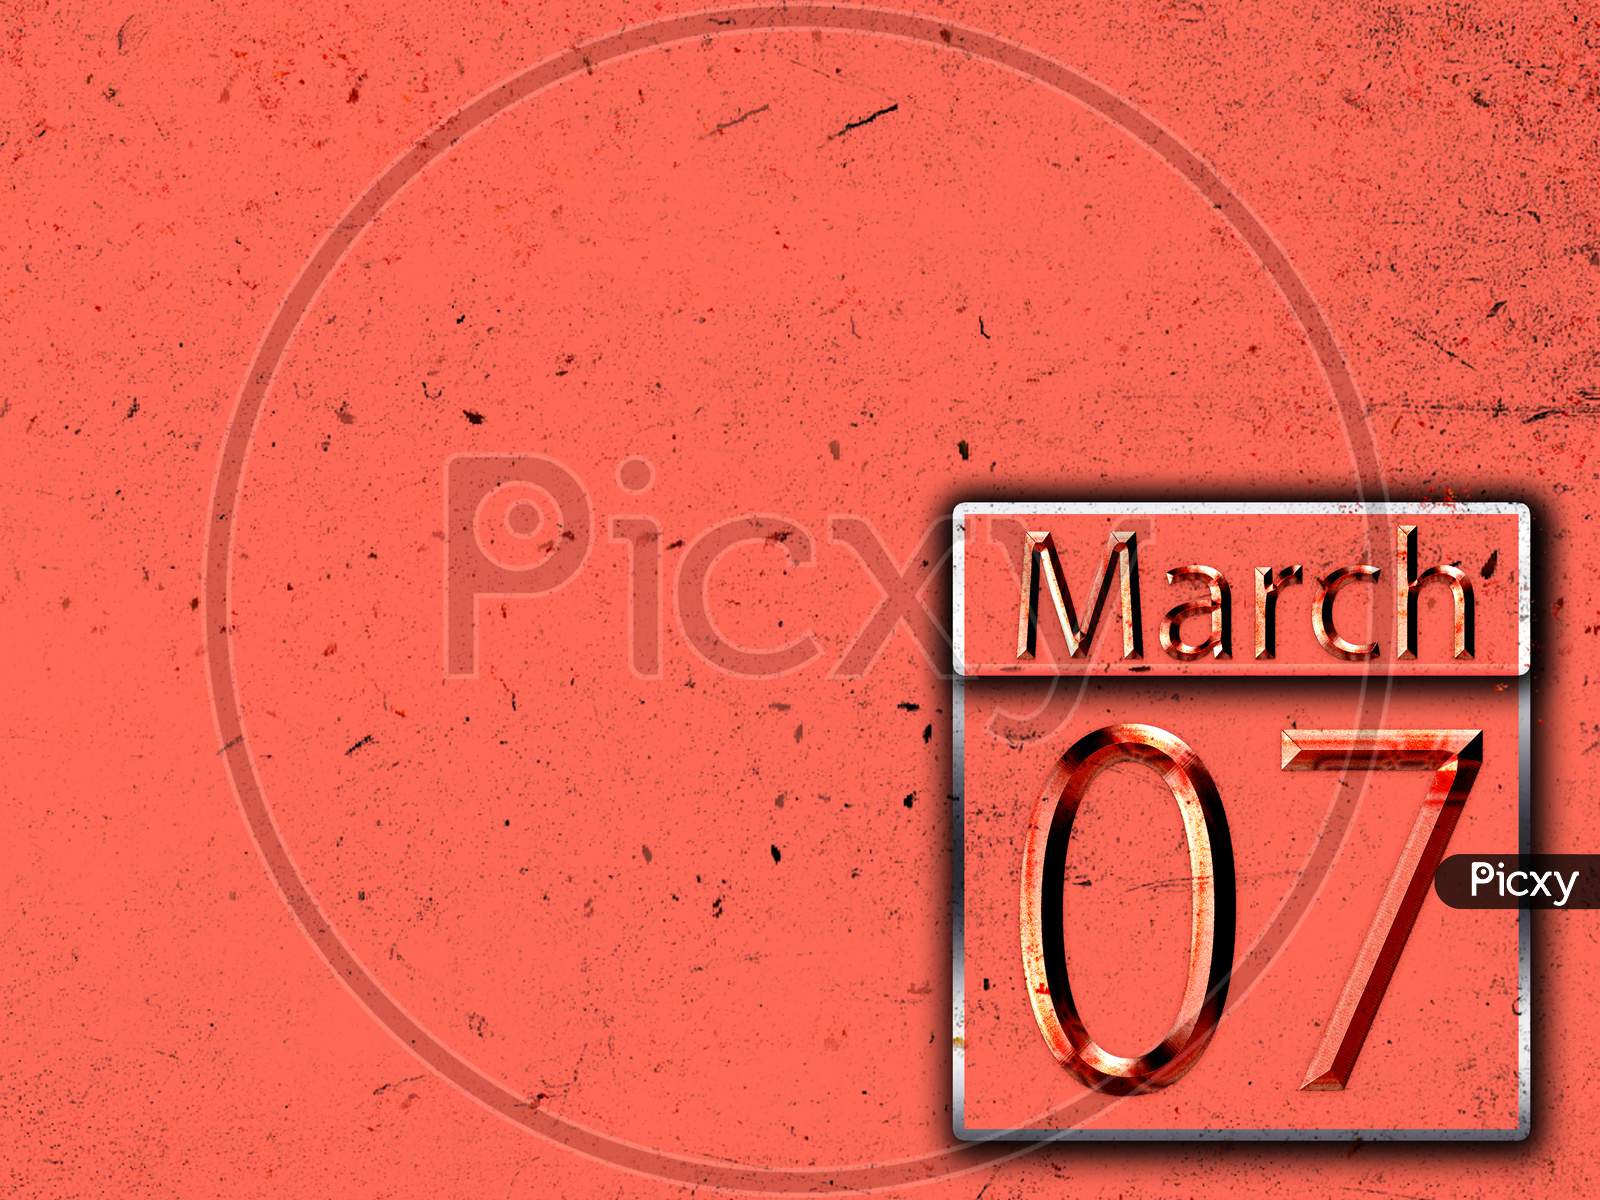 07 March, Monthly Calendar On Backgrand